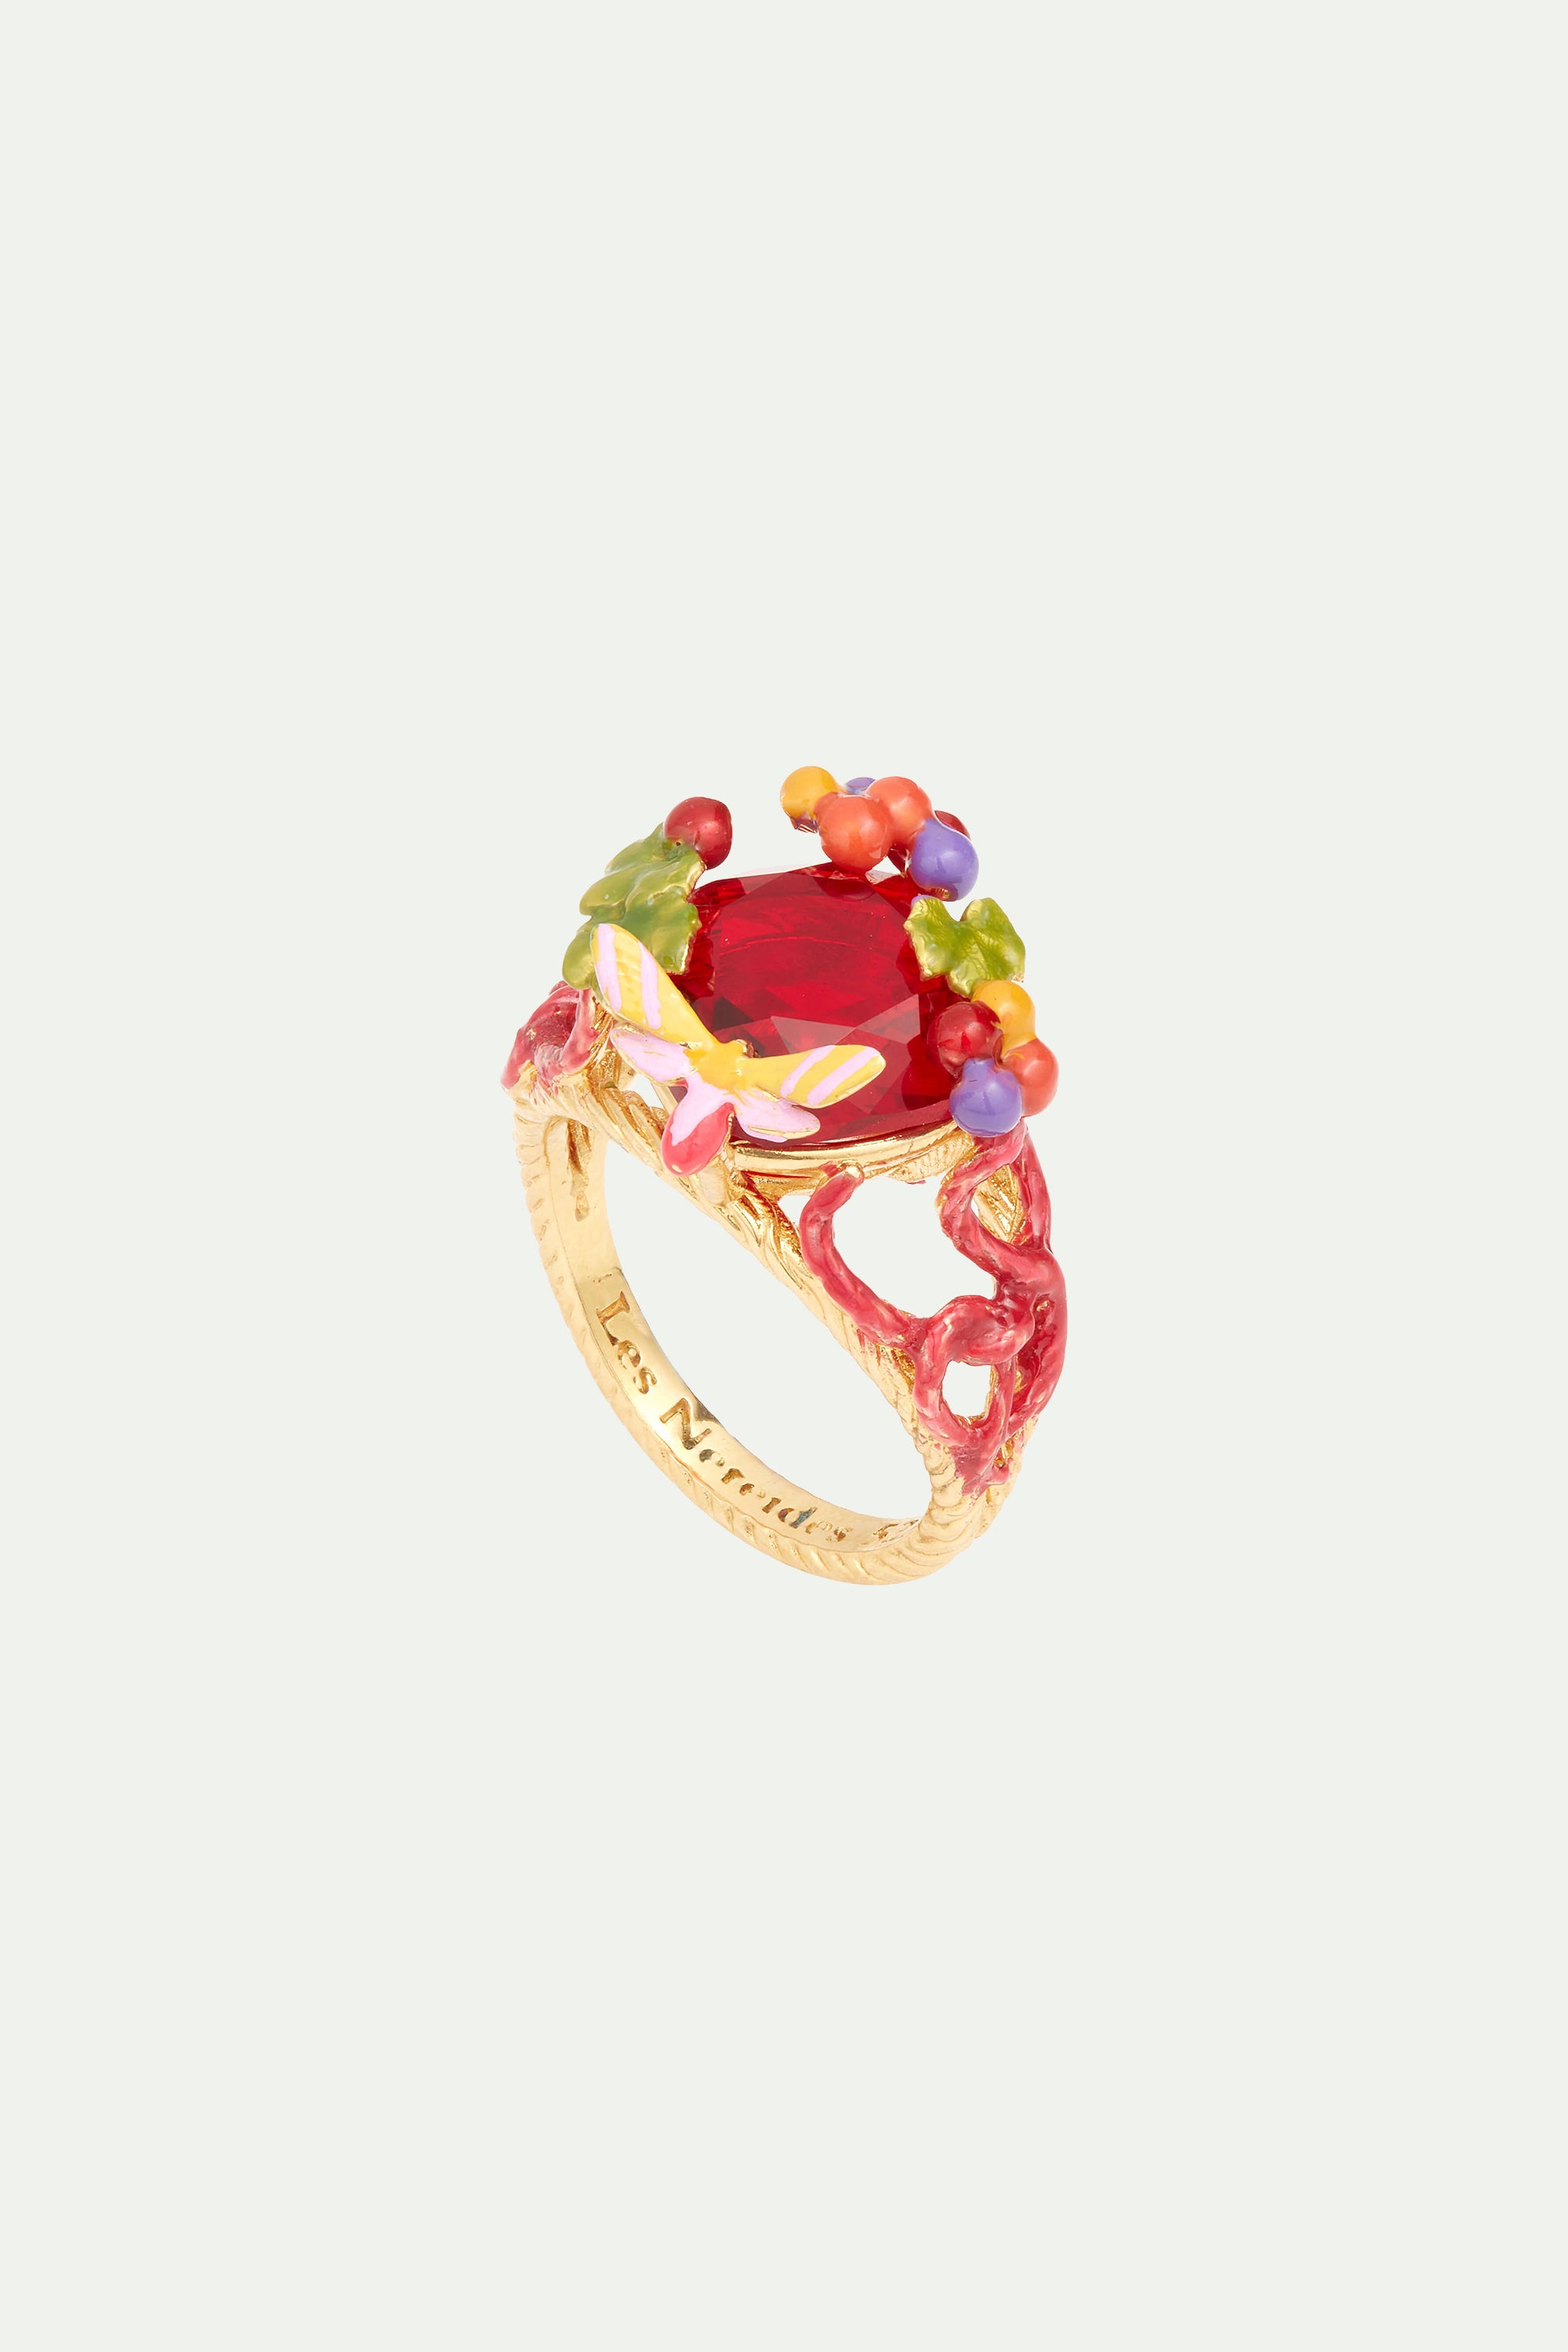 Garnet red stone and grapes cocktail ring